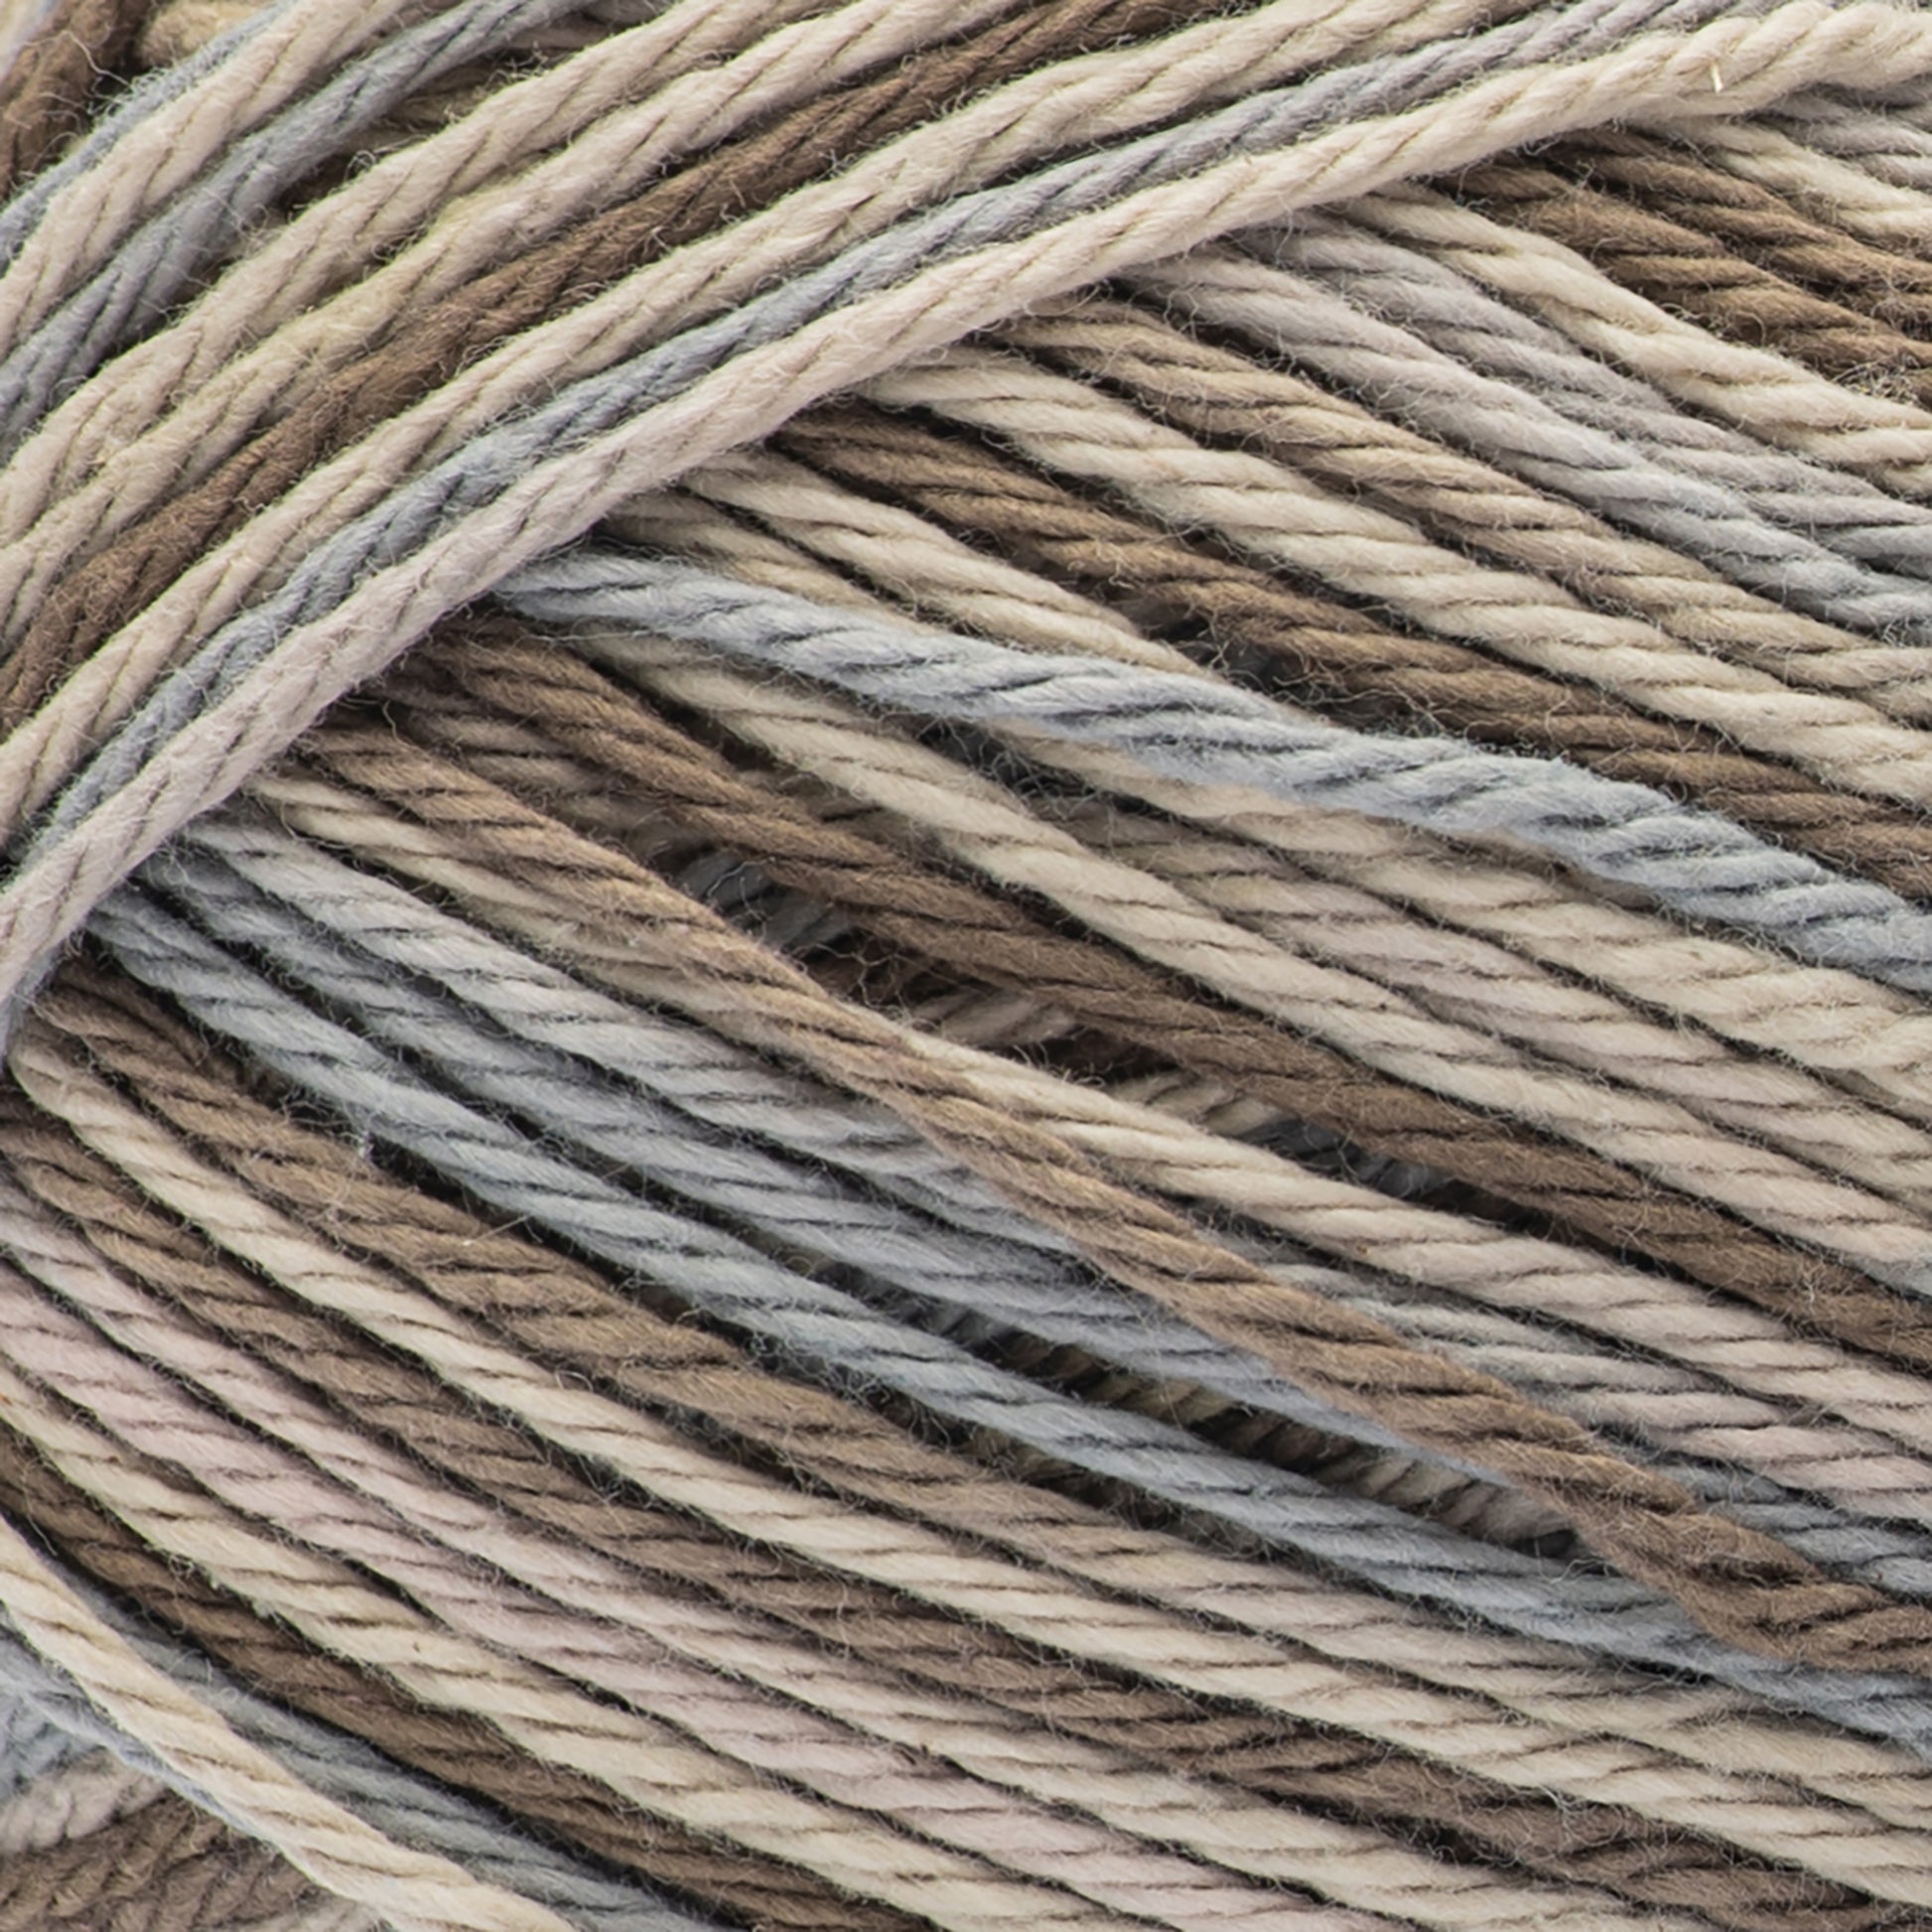 Bernat Handicrafter Cotton Ombres Yarn (340g/12oz) Earth Ombre